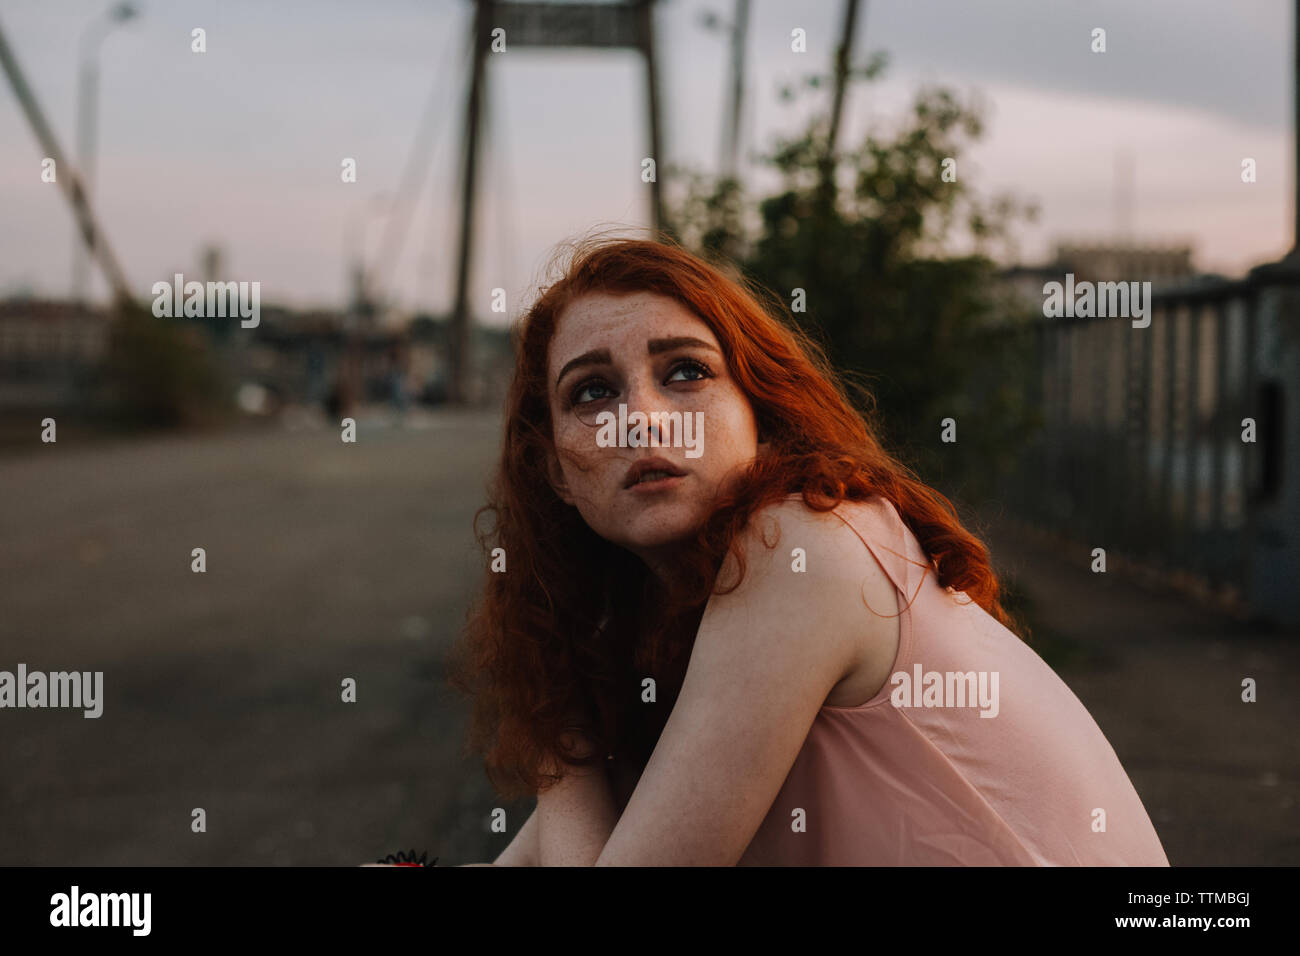 Portrait of teenage girl with freckles sitting on bridge in city Stock Photo